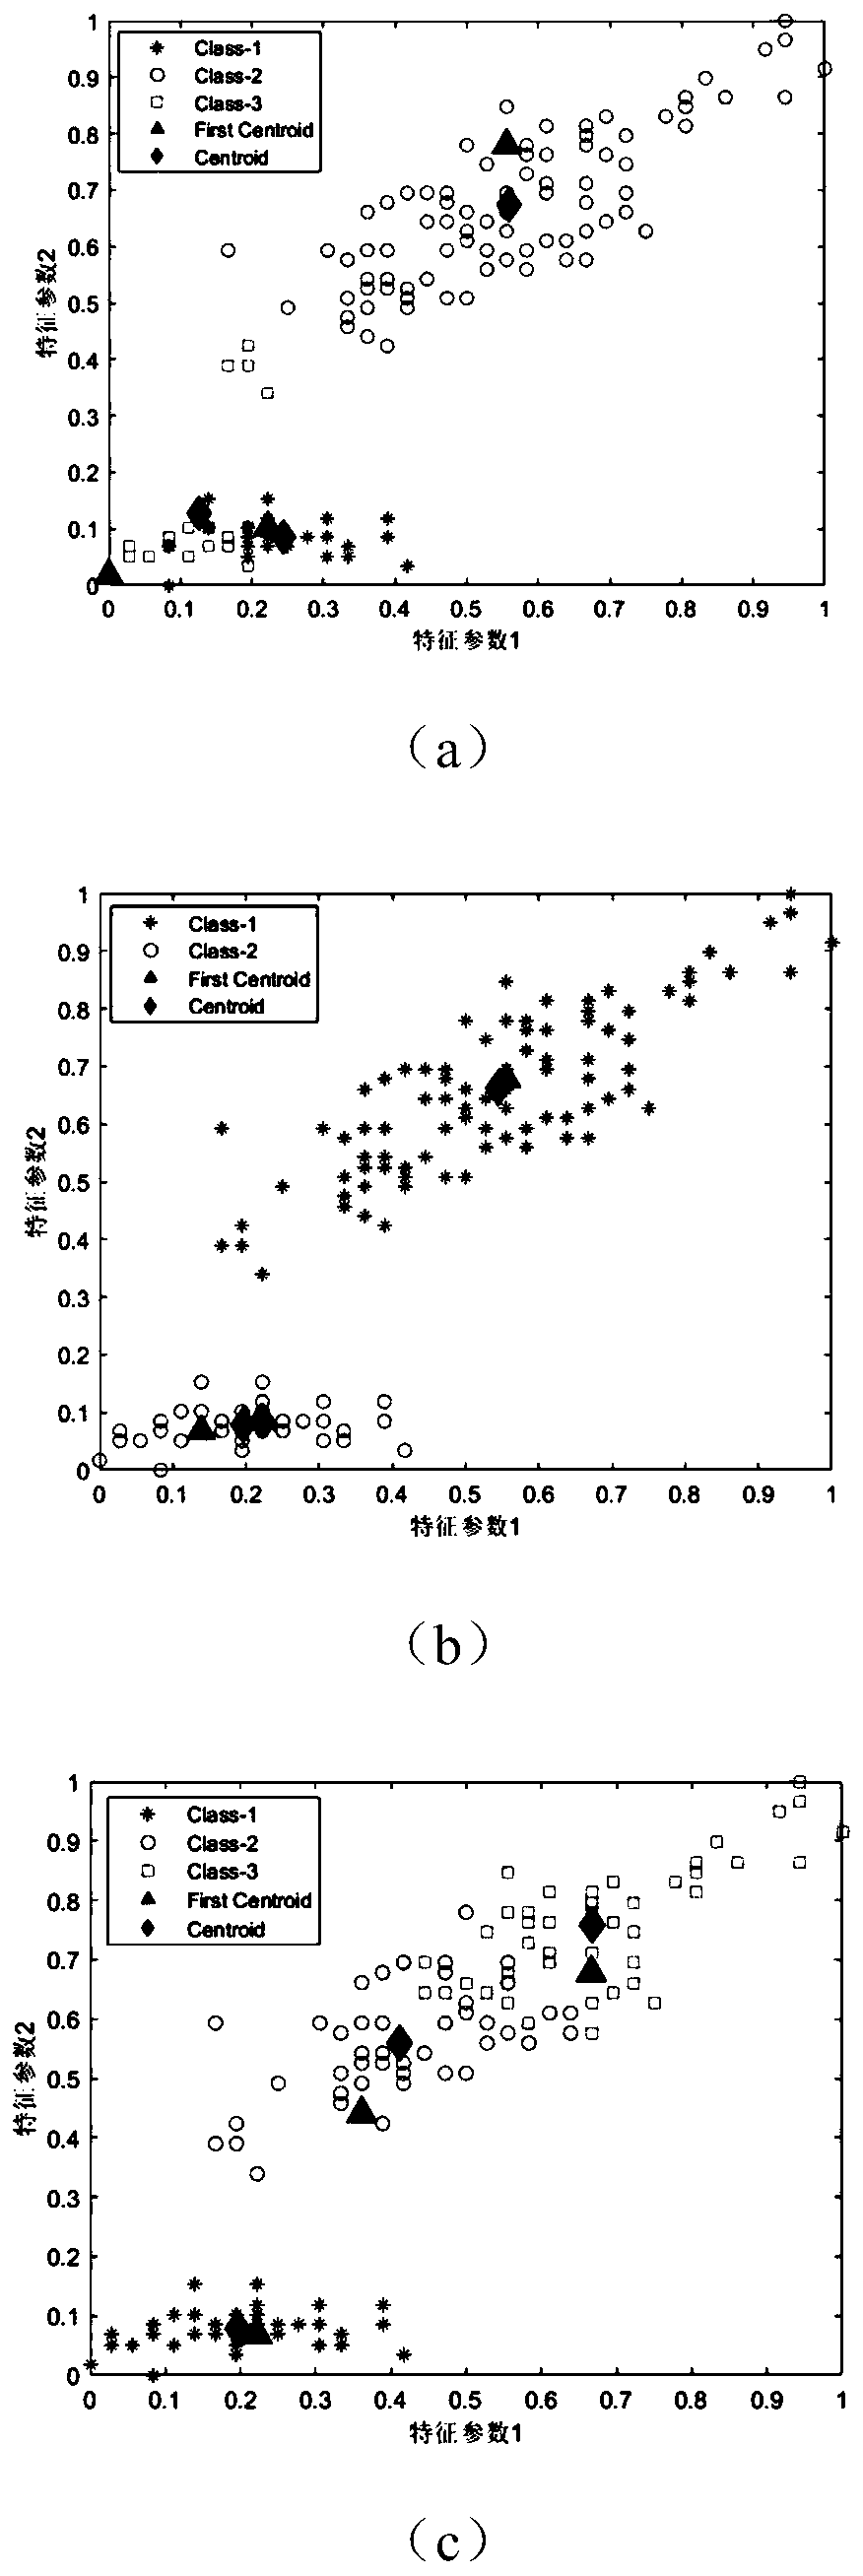 Self-adaptive K-means clustering method based on local density and ball hash